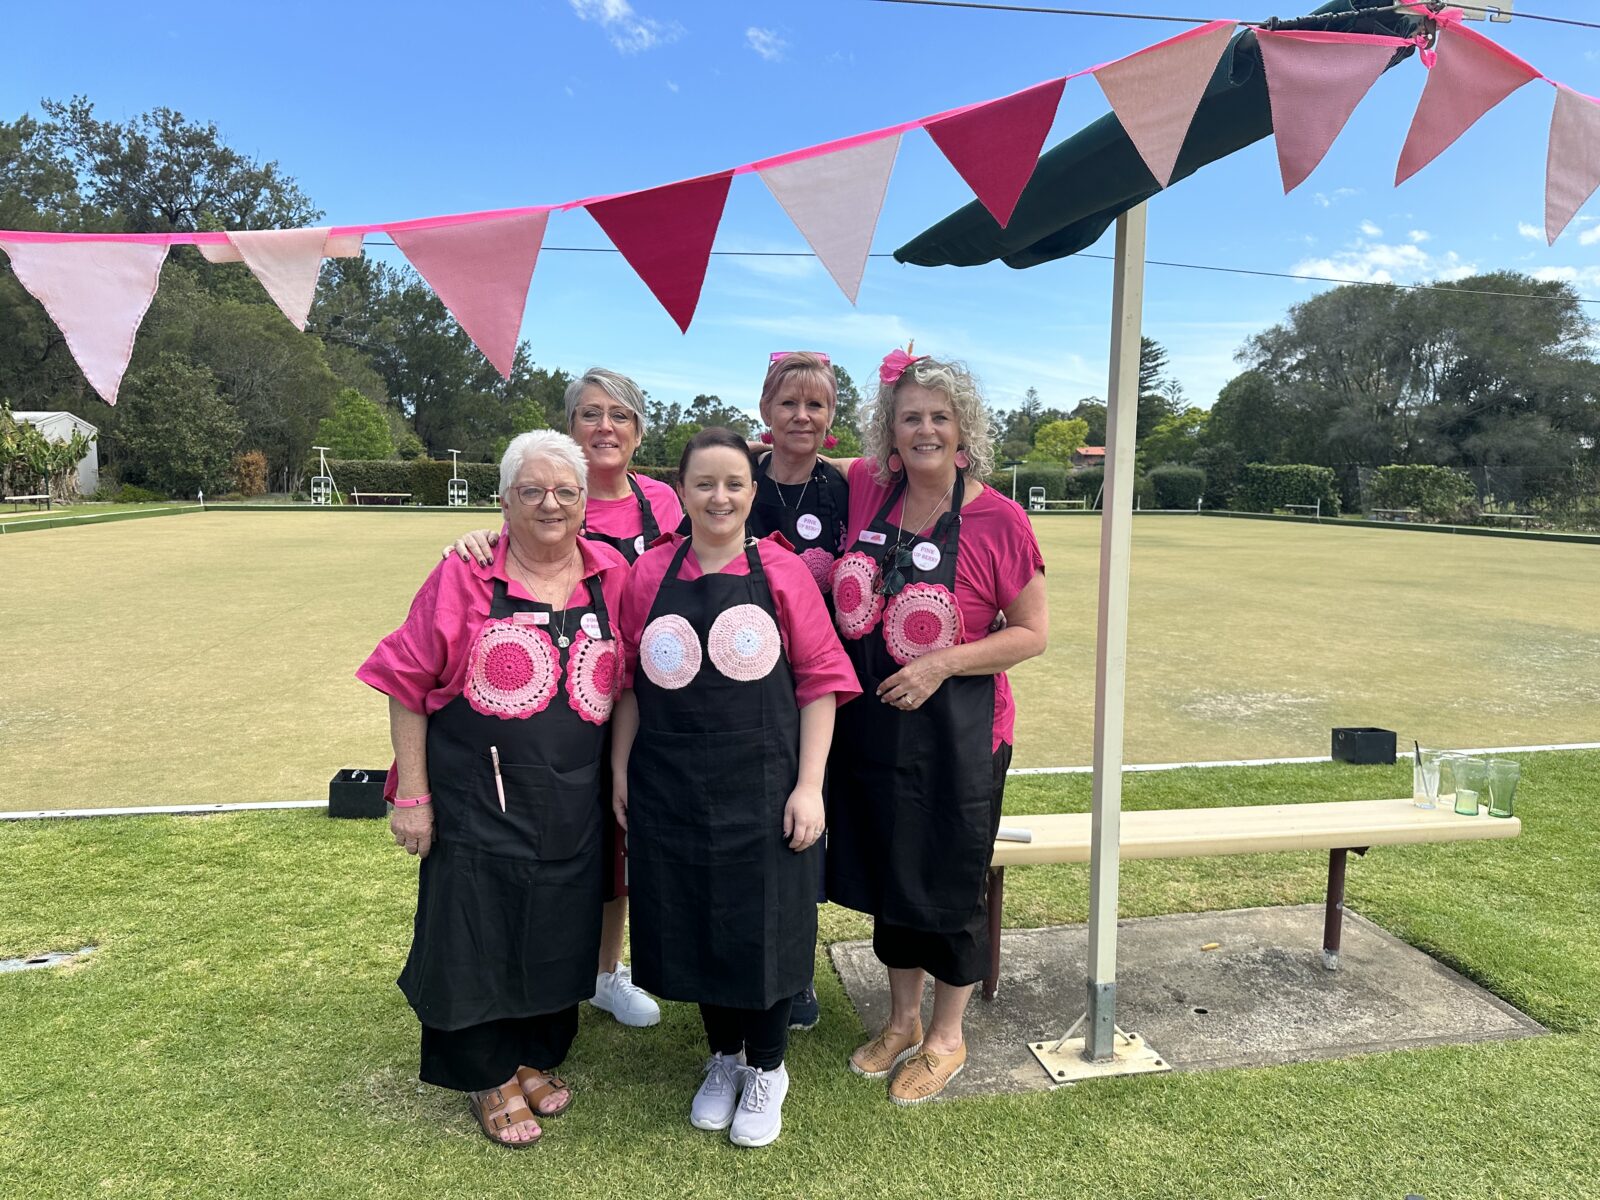 Group of fundraisers at Pink Up Berry standing on bowling greens wearing pink.